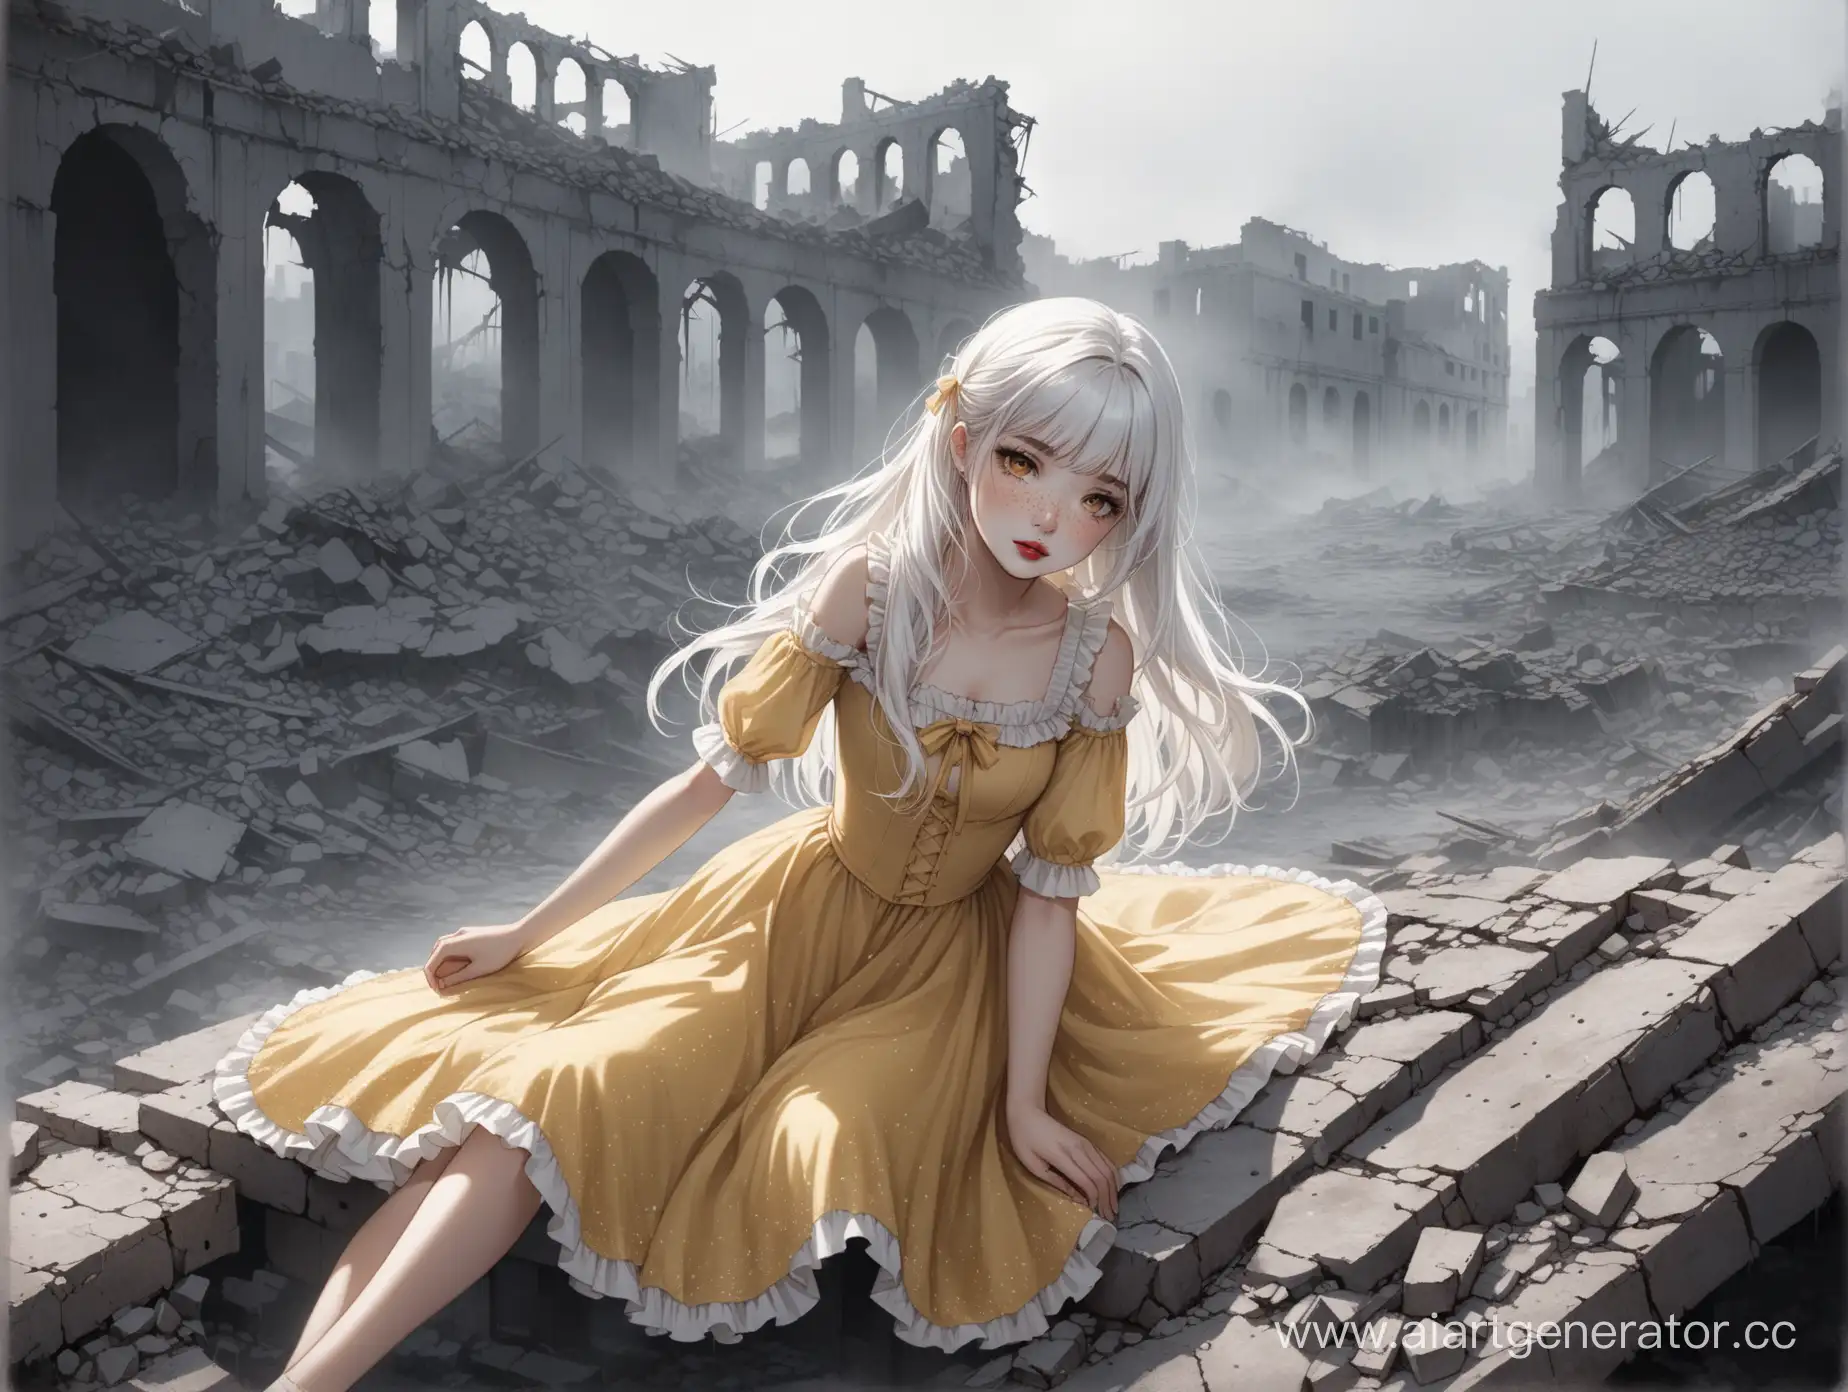 Lolitainspired-Girl-Reaching-from-Ruined-City